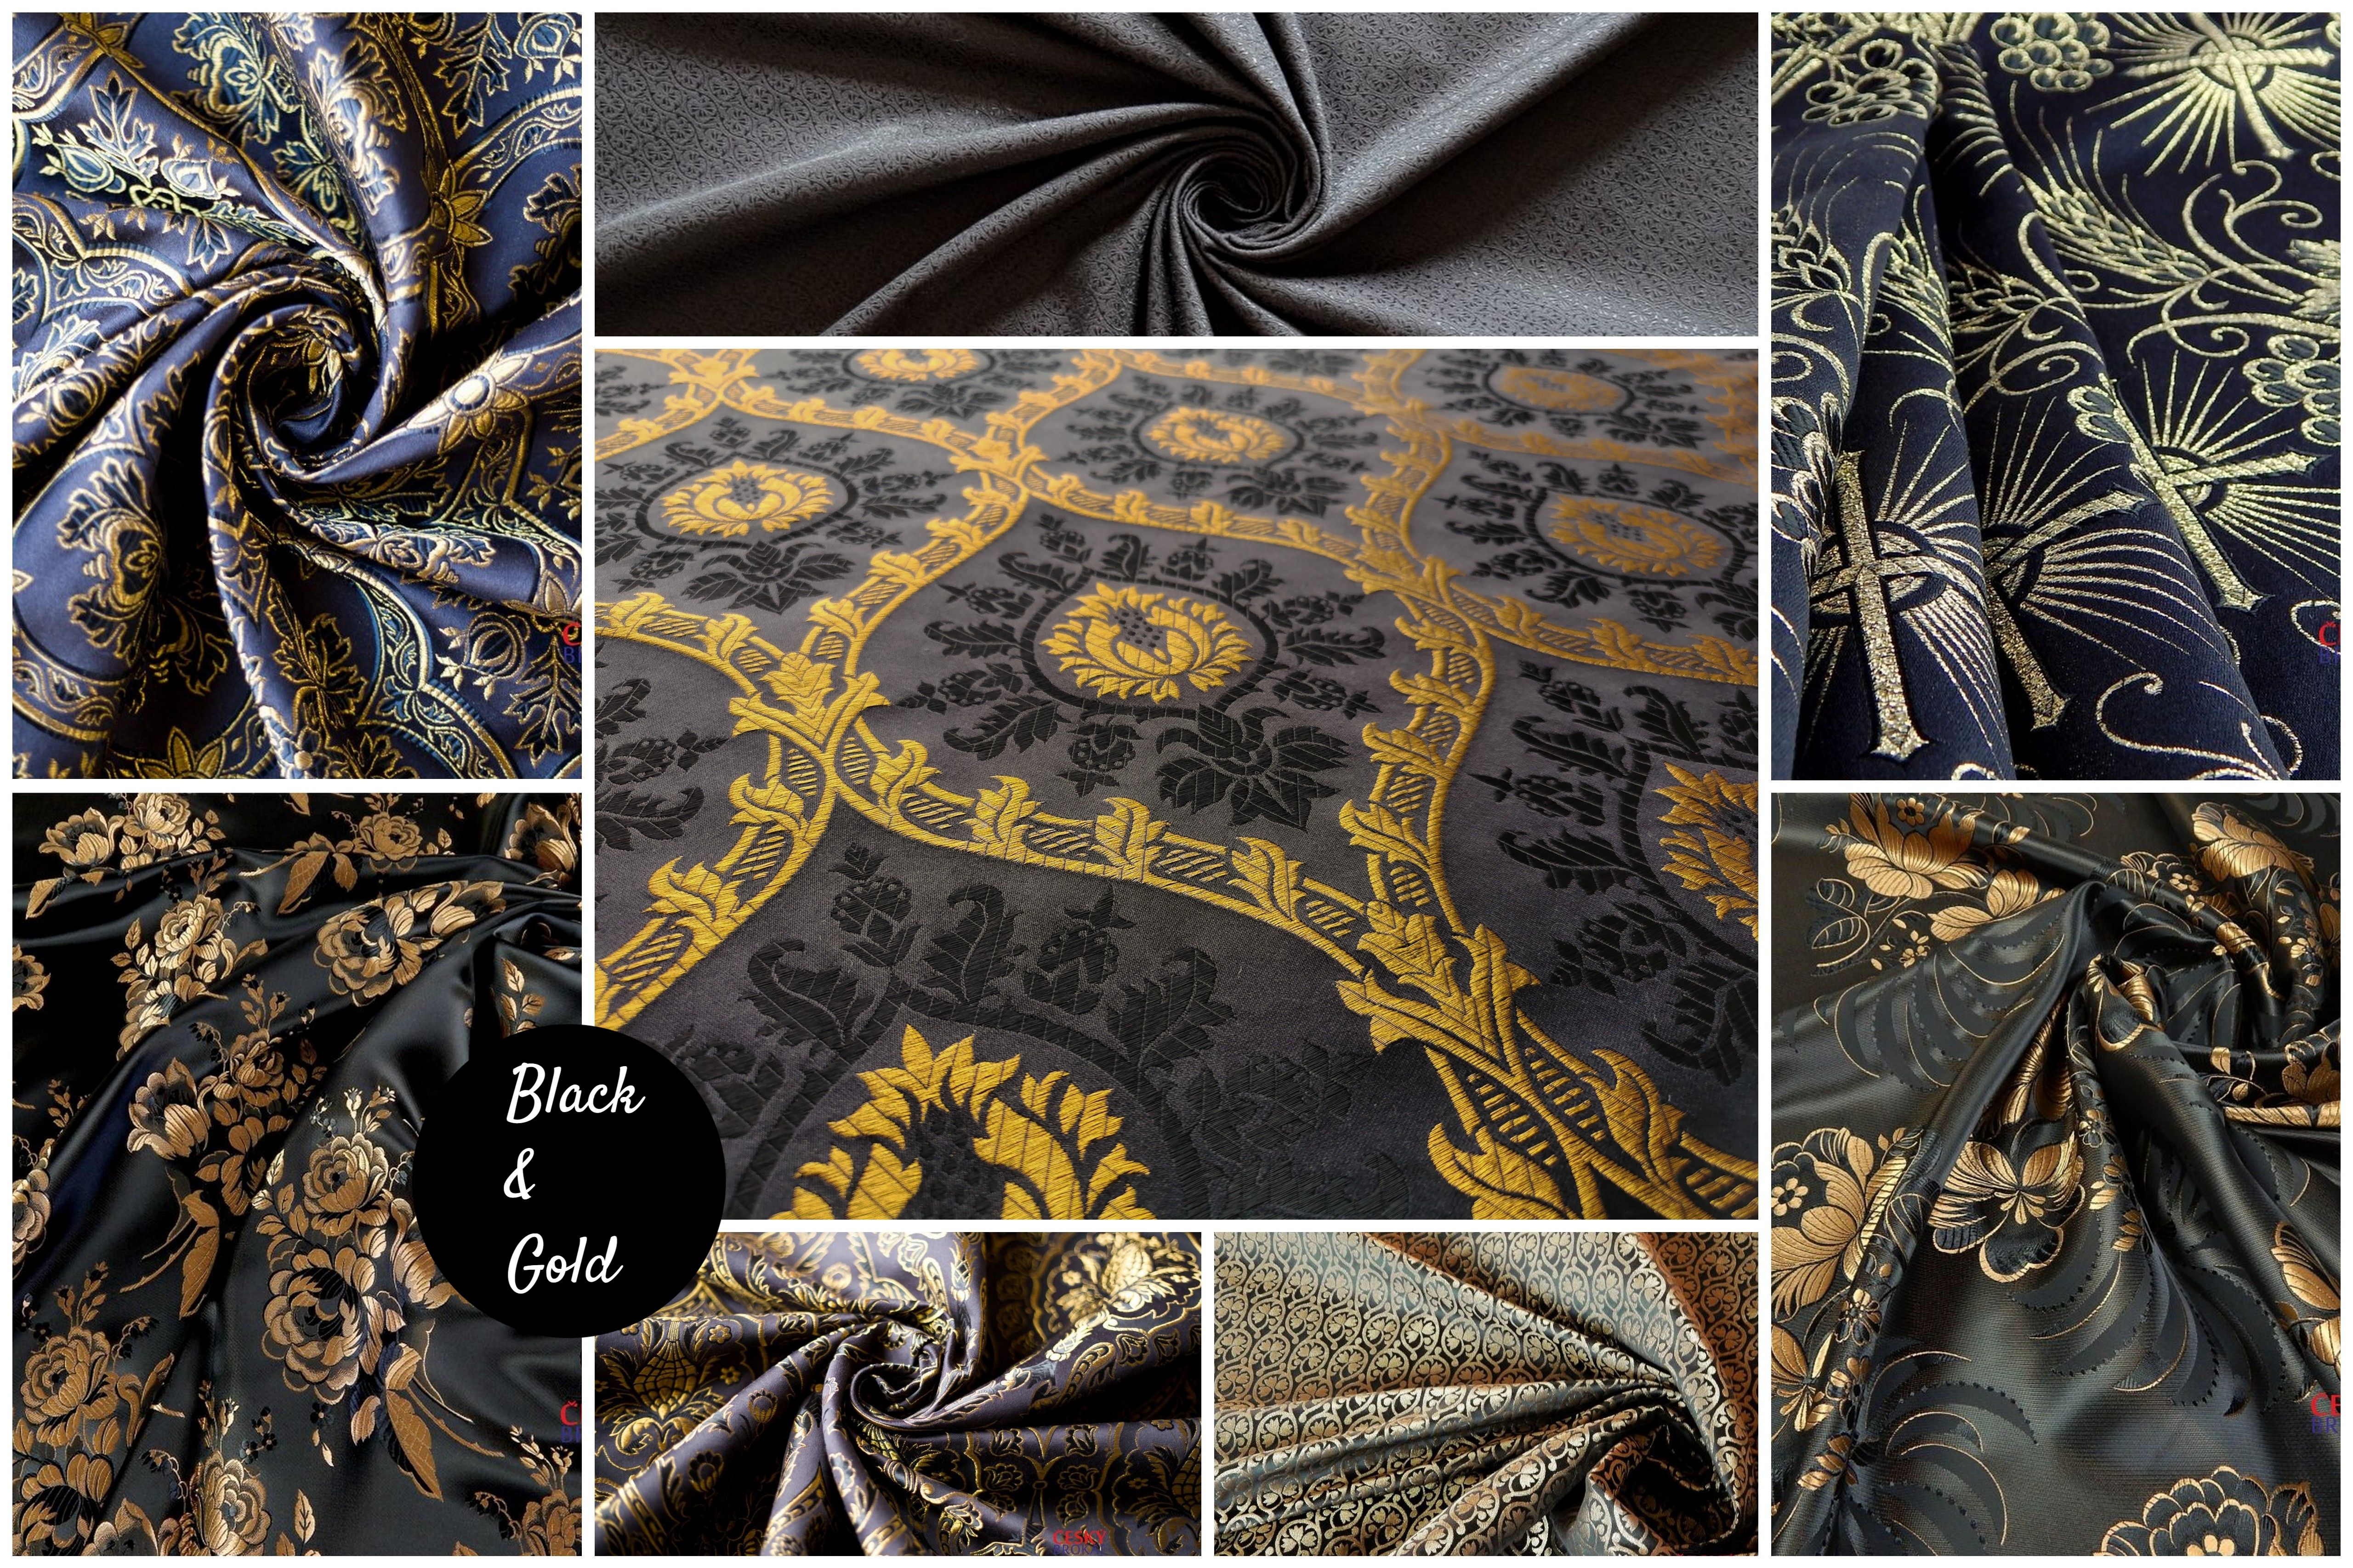 Black & Gold - dark elegance in the new collection